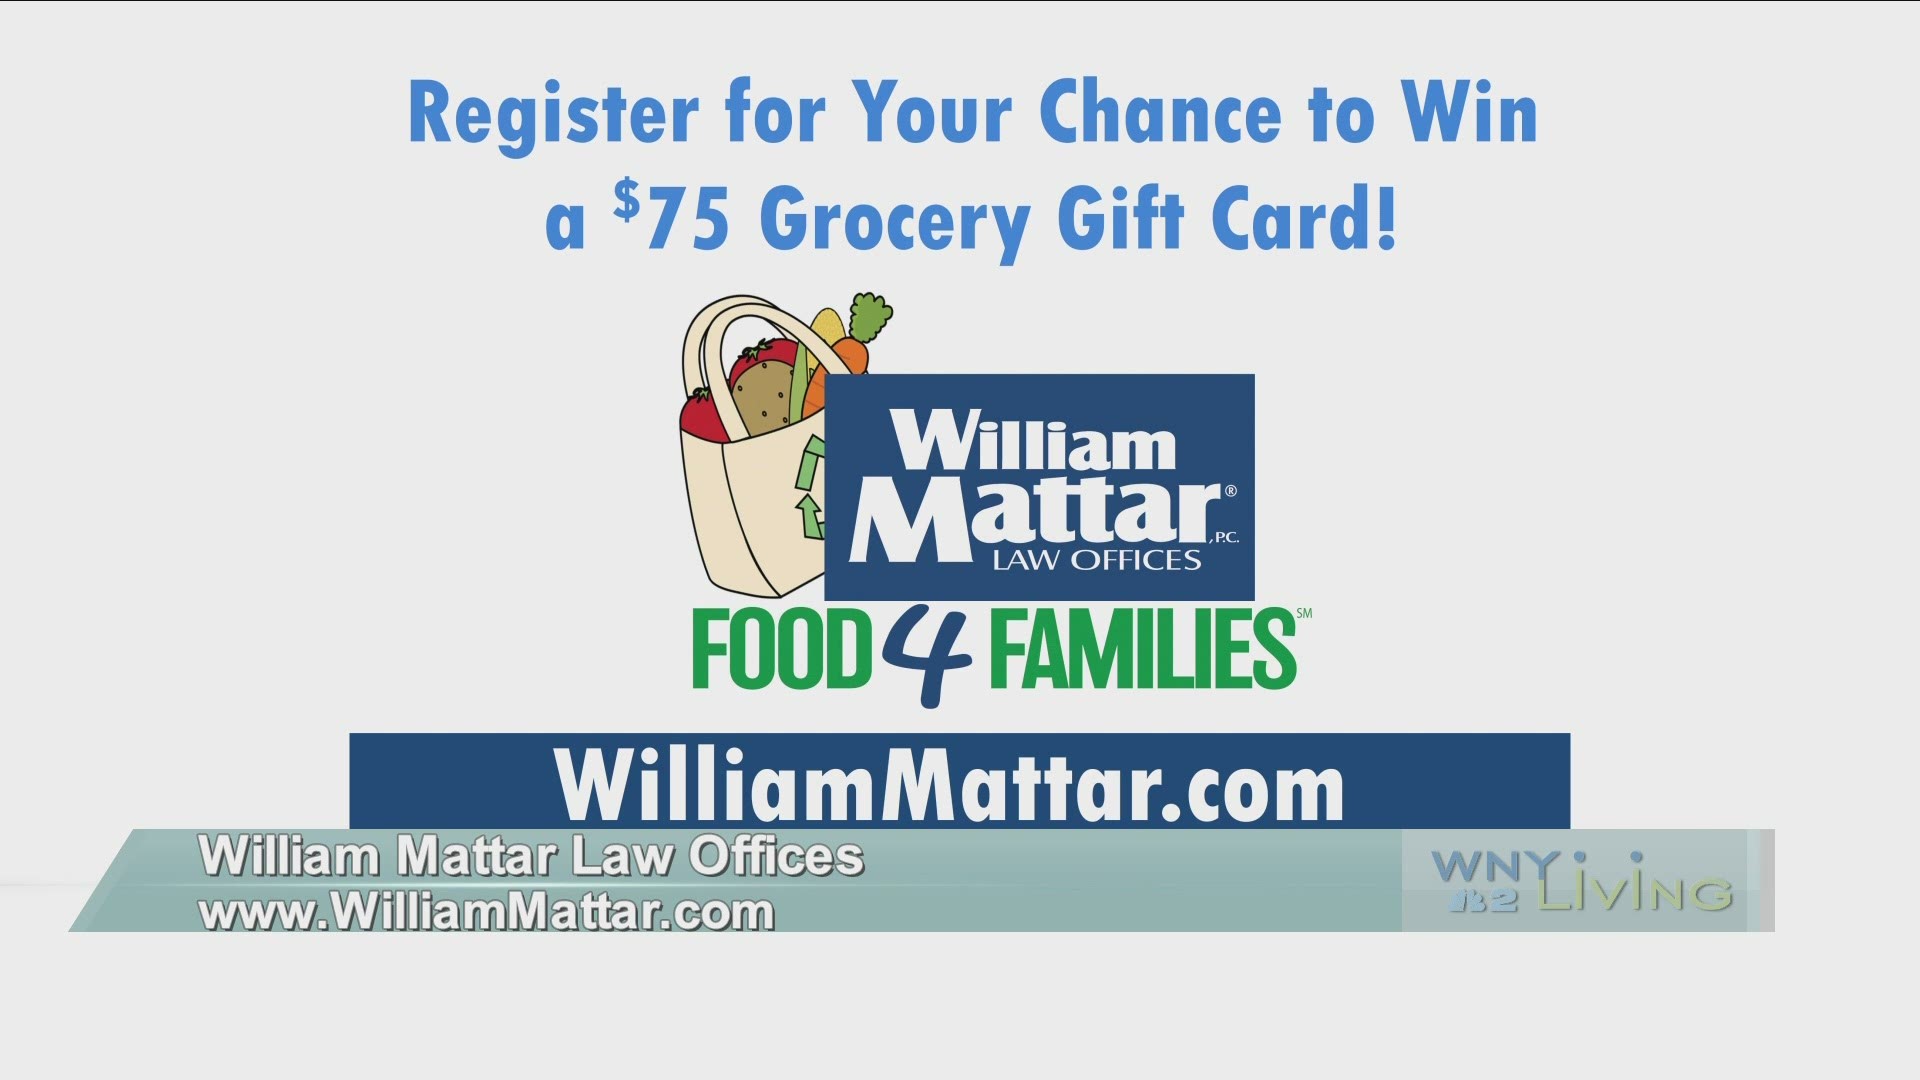 WNY Living - February 13 - William Mattar Law Offices (THIS VIDEO IS SPONSORED BY WILLIAM MATTAR LAW OFFICES)